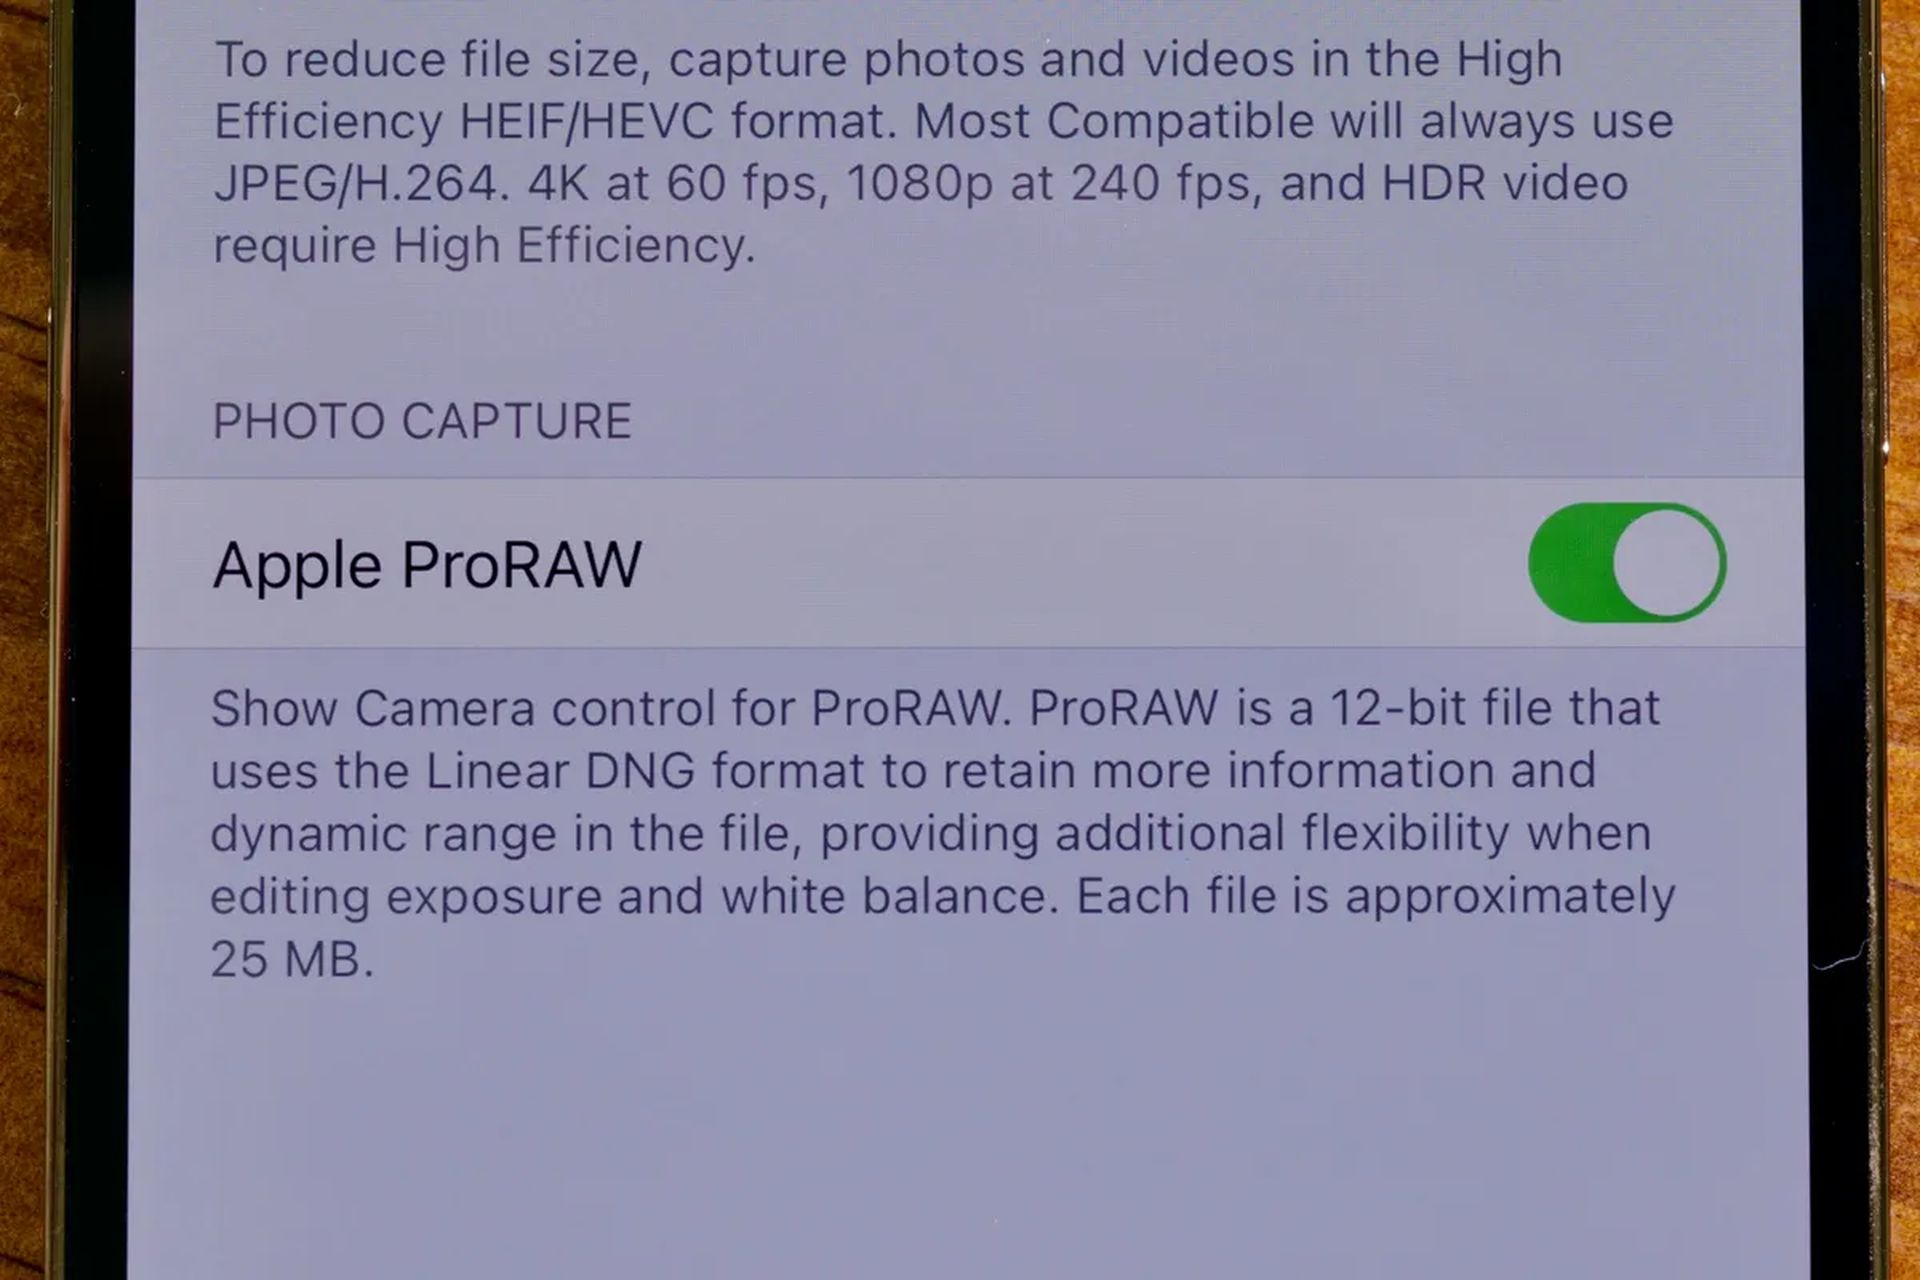 In this article, we are going to be covering how to take Apple ProRAW photos on iPhone, so you can edit them later like any professional photographer.